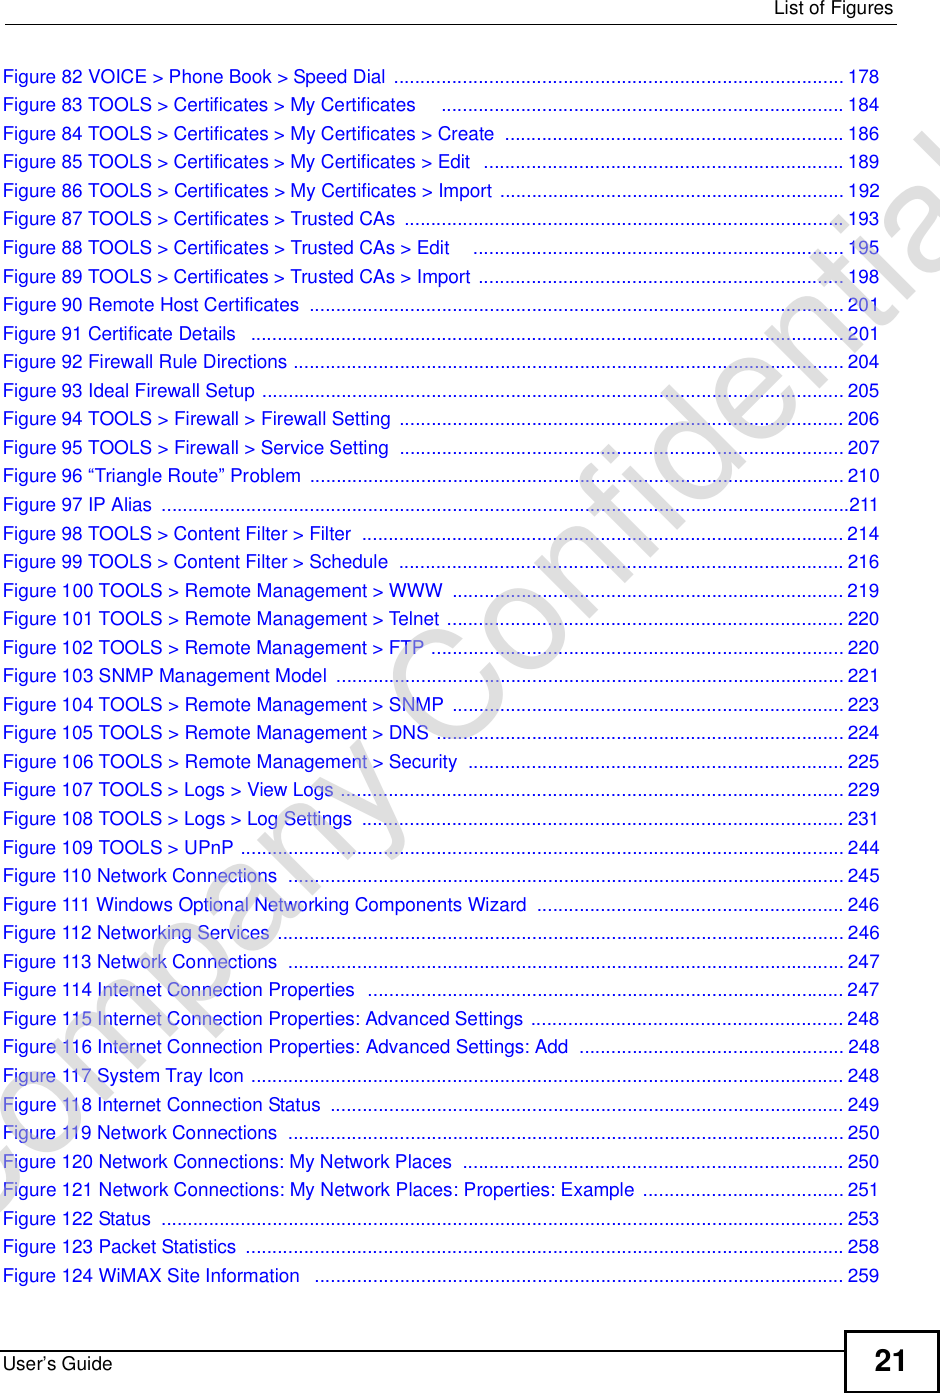  List of FiguresUser’s Guide 21Figure 82 VOICE &gt; Phone Book &gt; Speed Dial .....................................................................................178Figure 83 TOOLS &gt; Certificates &gt; My Certificates    ............................................................................184Figure 84 TOOLS &gt; Certificates &gt; My Certificates &gt; Create ................................................................186Figure 85 TOOLS &gt; Certificates &gt; My Certificates &gt; Edit  ....................................................................189Figure 86 TOOLS &gt; Certificates &gt; My Certificates &gt; Import .................................................................192Figure 87 TOOLS &gt; Certificates &gt; Trusted CAs ...................................................................................193Figure 88 TOOLS &gt; Certificates &gt; Trusted CAs &gt; Edit    ......................................................................195Figure 89 TOOLS &gt; Certificates &gt; Trusted CAs &gt; Import .....................................................................198Figure 90 Remote Host Certificates .....................................................................................................201Figure 91 Certificate Details  ................................................................................................................201Figure 92 Firewall Rule Directions ........................................................................................................204Figure 93 Ideal Firewall Setup ..............................................................................................................205Figure 94 TOOLS &gt; Firewall &gt; Firewall Setting ....................................................................................206Figure 95 TOOLS &gt; Firewall &gt; Service Setting ....................................................................................207Figure 96 “Triangle Route” Problem .....................................................................................................210Figure 97 IP Alias ..................................................................................................................................211Figure 98 TOOLS &gt; Content Filter &gt; Filter ...........................................................................................214Figure 99 TOOLS &gt; Content Filter &gt; Schedule ....................................................................................216Figure 100 TOOLS &gt; Remote Management &gt; WWW ..........................................................................219Figure 101 TOOLS &gt; Remote Management &gt; Telnet ...........................................................................220Figure 102 TOOLS &gt; Remote Management &gt; FTP ..............................................................................220Figure 103 SNMP Management Model ................................................................................................221Figure 104 TOOLS &gt; Remote Management &gt; SNMP ..........................................................................223Figure 105 TOOLS &gt; Remote Management &gt; DNS .............................................................................224Figure 106 TOOLS &gt; Remote Management &gt; Security .......................................................................225Figure 107 TOOLS &gt; Logs &gt; View Logs ...............................................................................................229Figure 108 TOOLS &gt; Logs &gt; Log Settings ...........................................................................................231Figure 109 TOOLS &gt; UPnP ..................................................................................................................244Figure 110 Network Connections .........................................................................................................245Figure 111 Windows Optional Networking Components Wizard ..........................................................246Figure 112 Networking Services ...........................................................................................................246Figure 113 Network Connections .........................................................................................................247Figure 114 Internet Connection Properties  ..........................................................................................247Figure 115 Internet Connection Properties: Advanced Settings ...........................................................248Figure 116 Internet Connection Properties: Advanced Settings: Add ..................................................248Figure 117 System Tray Icon ................................................................................................................248Figure 118 Internet Connection Status .................................................................................................249Figure 119 Network Connections .........................................................................................................250Figure 120 Network Connections: My Network Places ........................................................................250Figure 121 Network Connections: My Network Places: Properties: Example ......................................251Figure 122 Status .................................................................................................................................253Figure 123 Packet Statistics .................................................................................................................258Figure 124 WiMAX Site Information  ....................................................................................................259Company Confidential